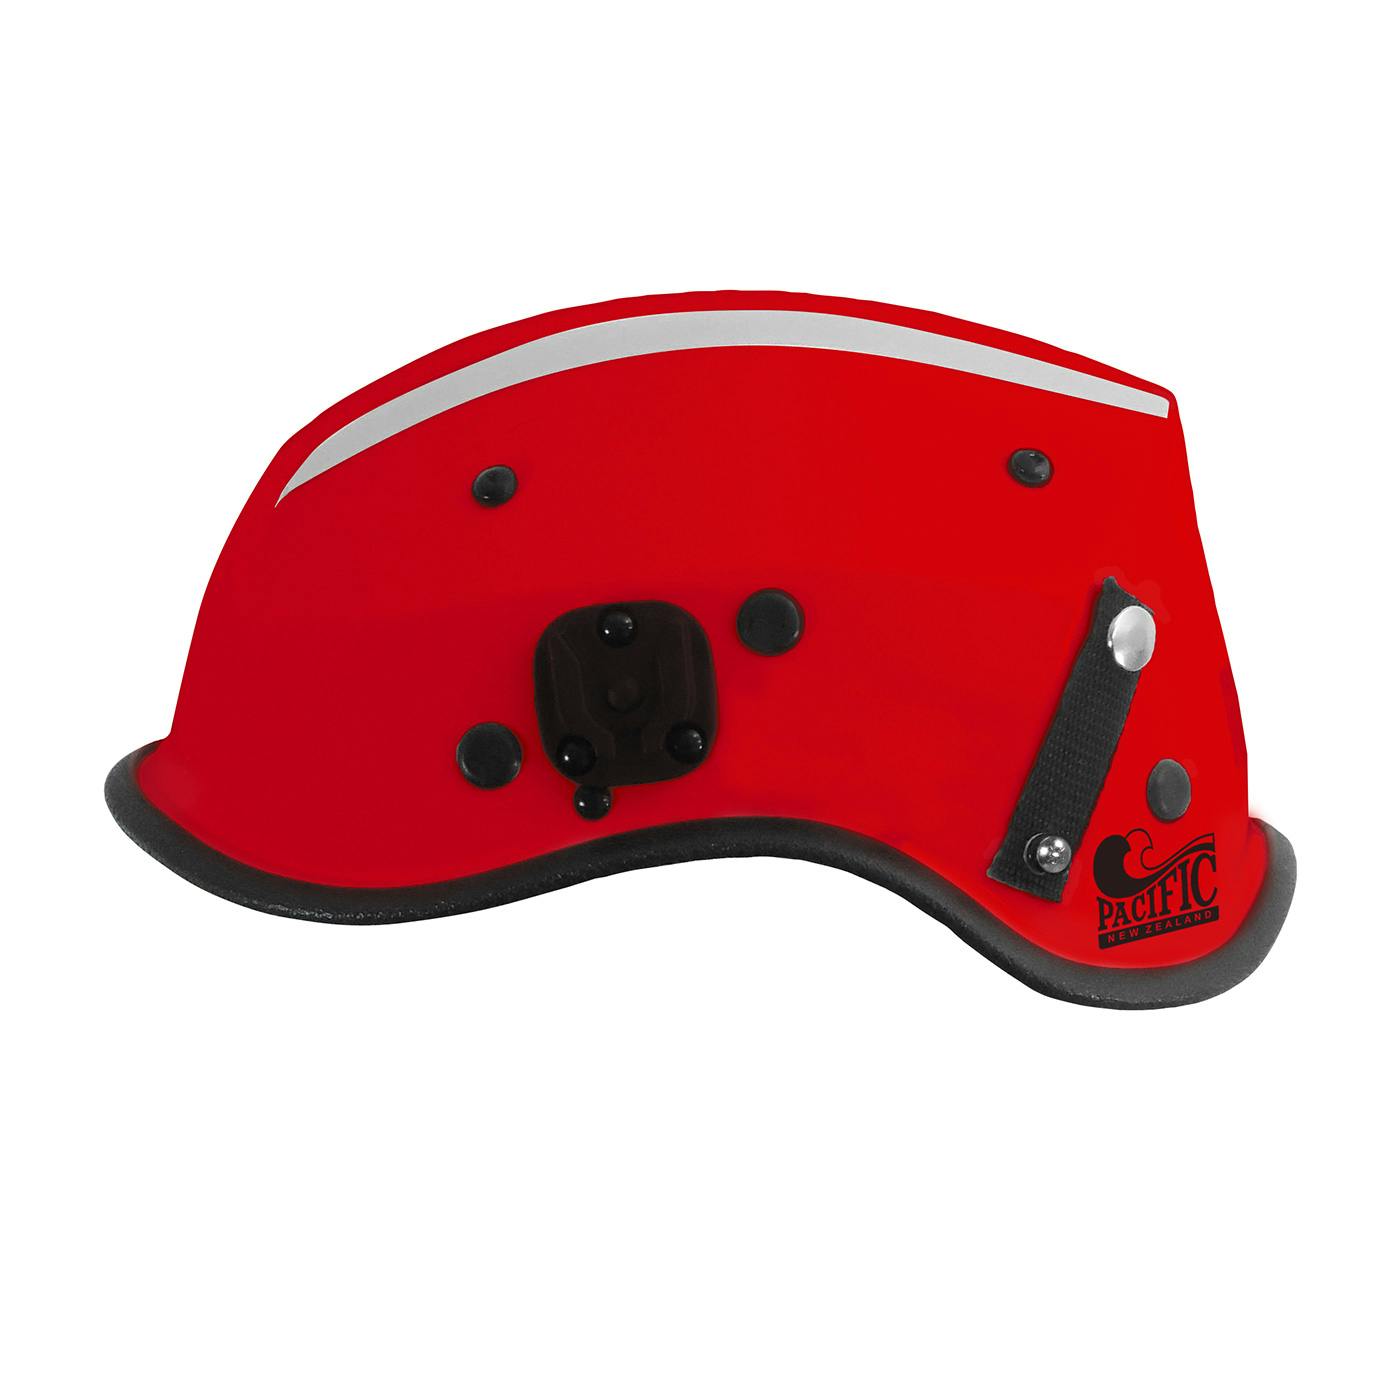 Non-Vented Rescue Helmet with Retractable Eye Protector and ESS Goggle Mounts, Red (805-35XX) - OS_0